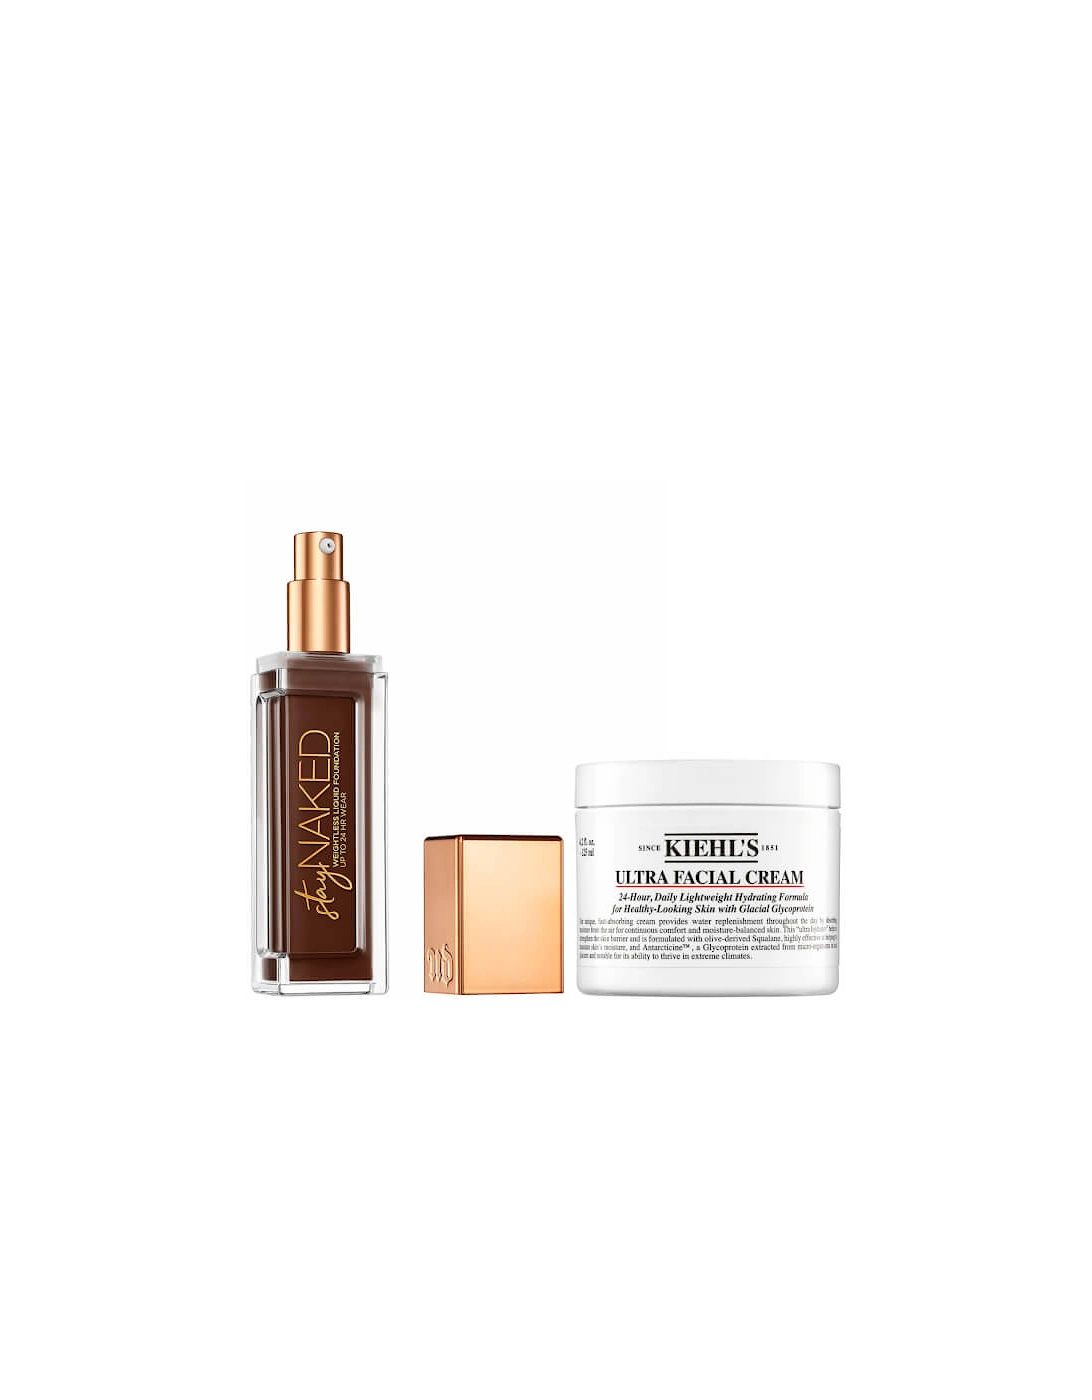 Stay Naked Foundation x Kiehl's Ultra Facial Cream 50ml Bundle - 90WO, 2 of 1